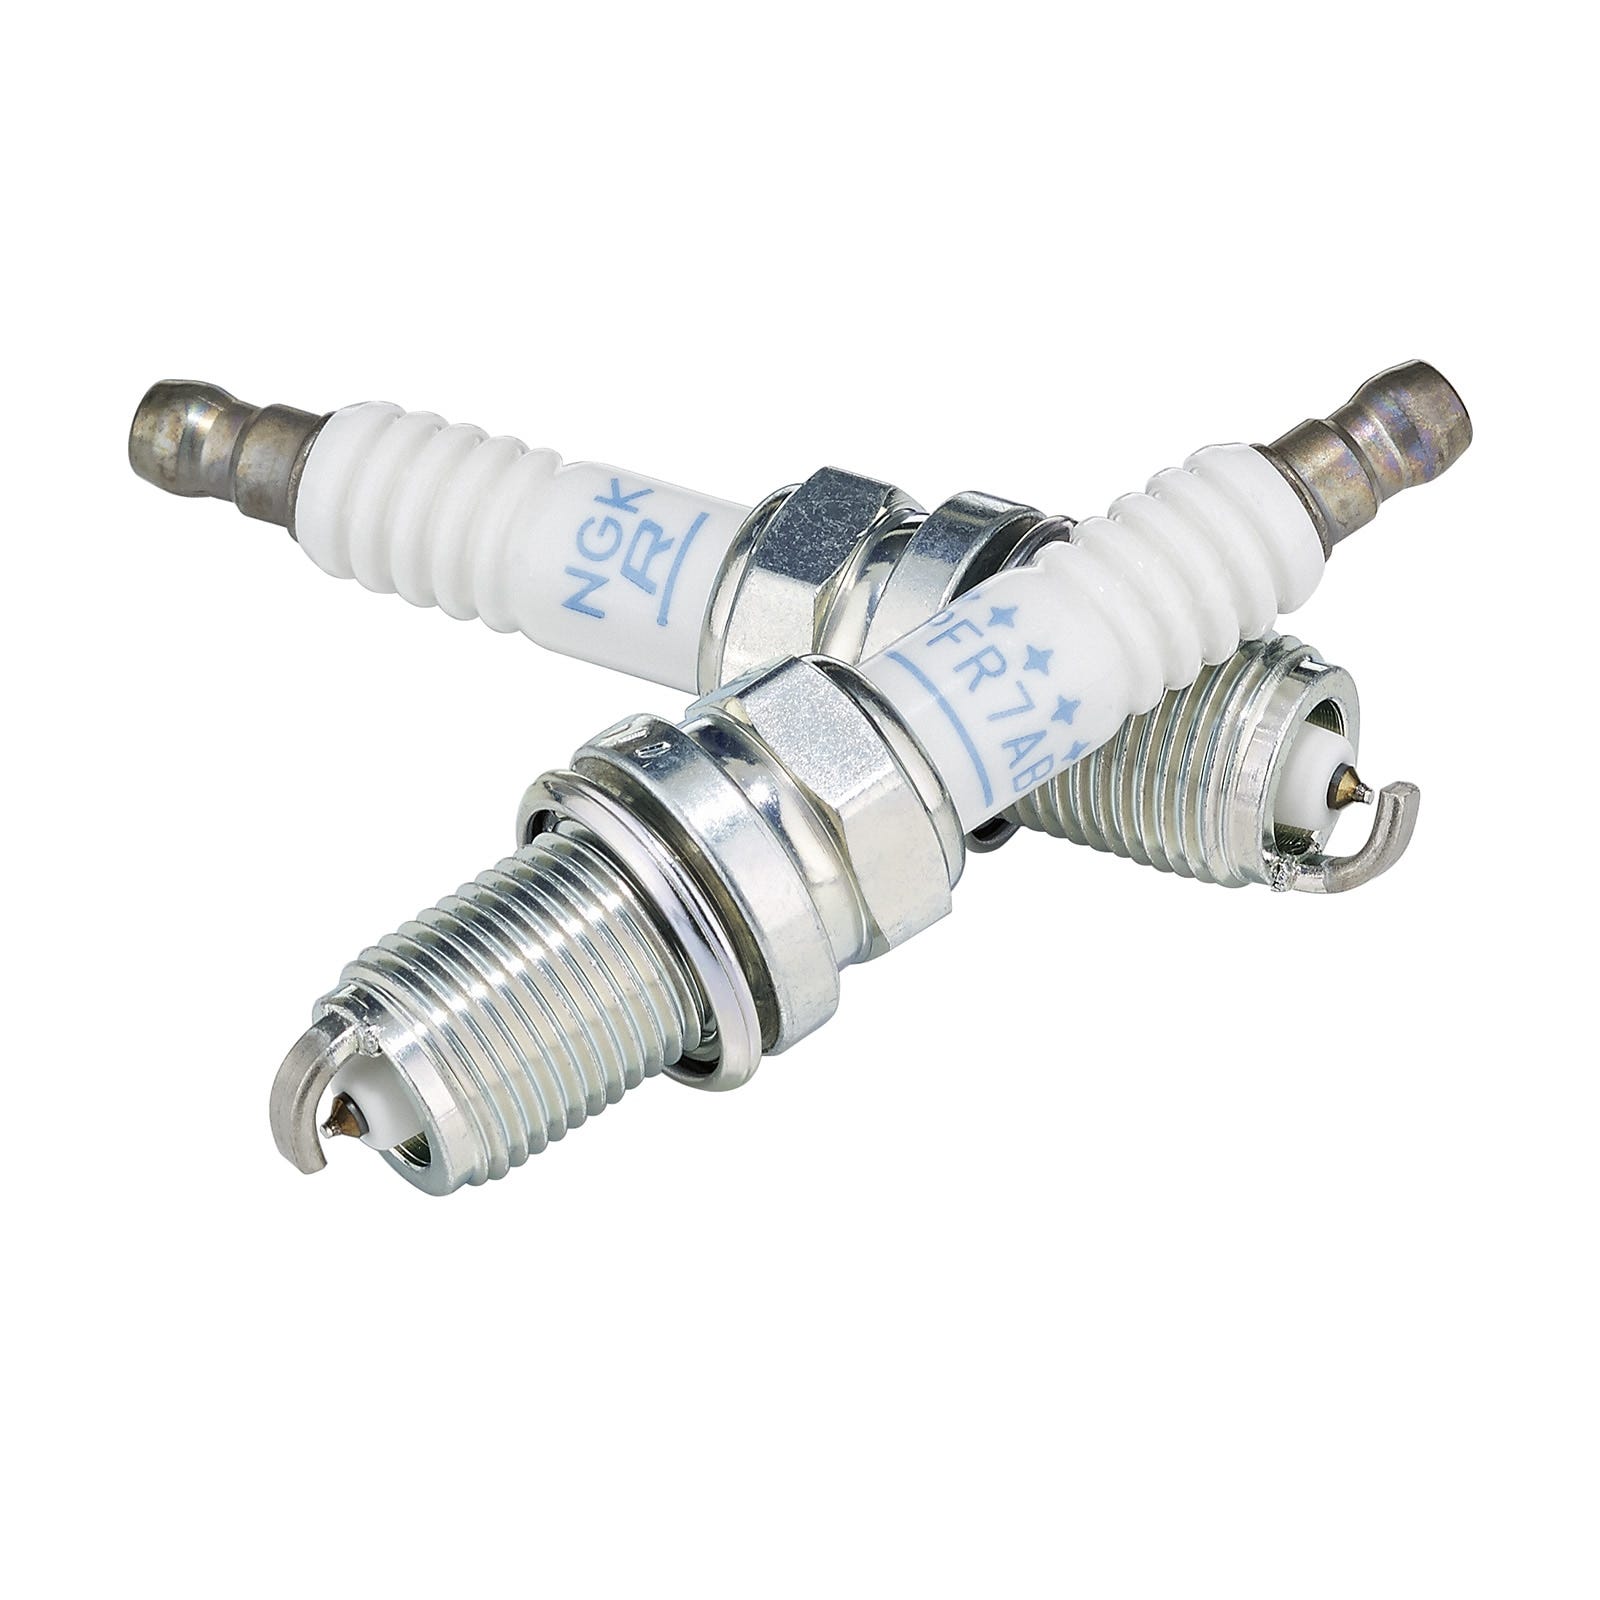 NGK Spark Plugs - 415129484 - The Parts Lodge